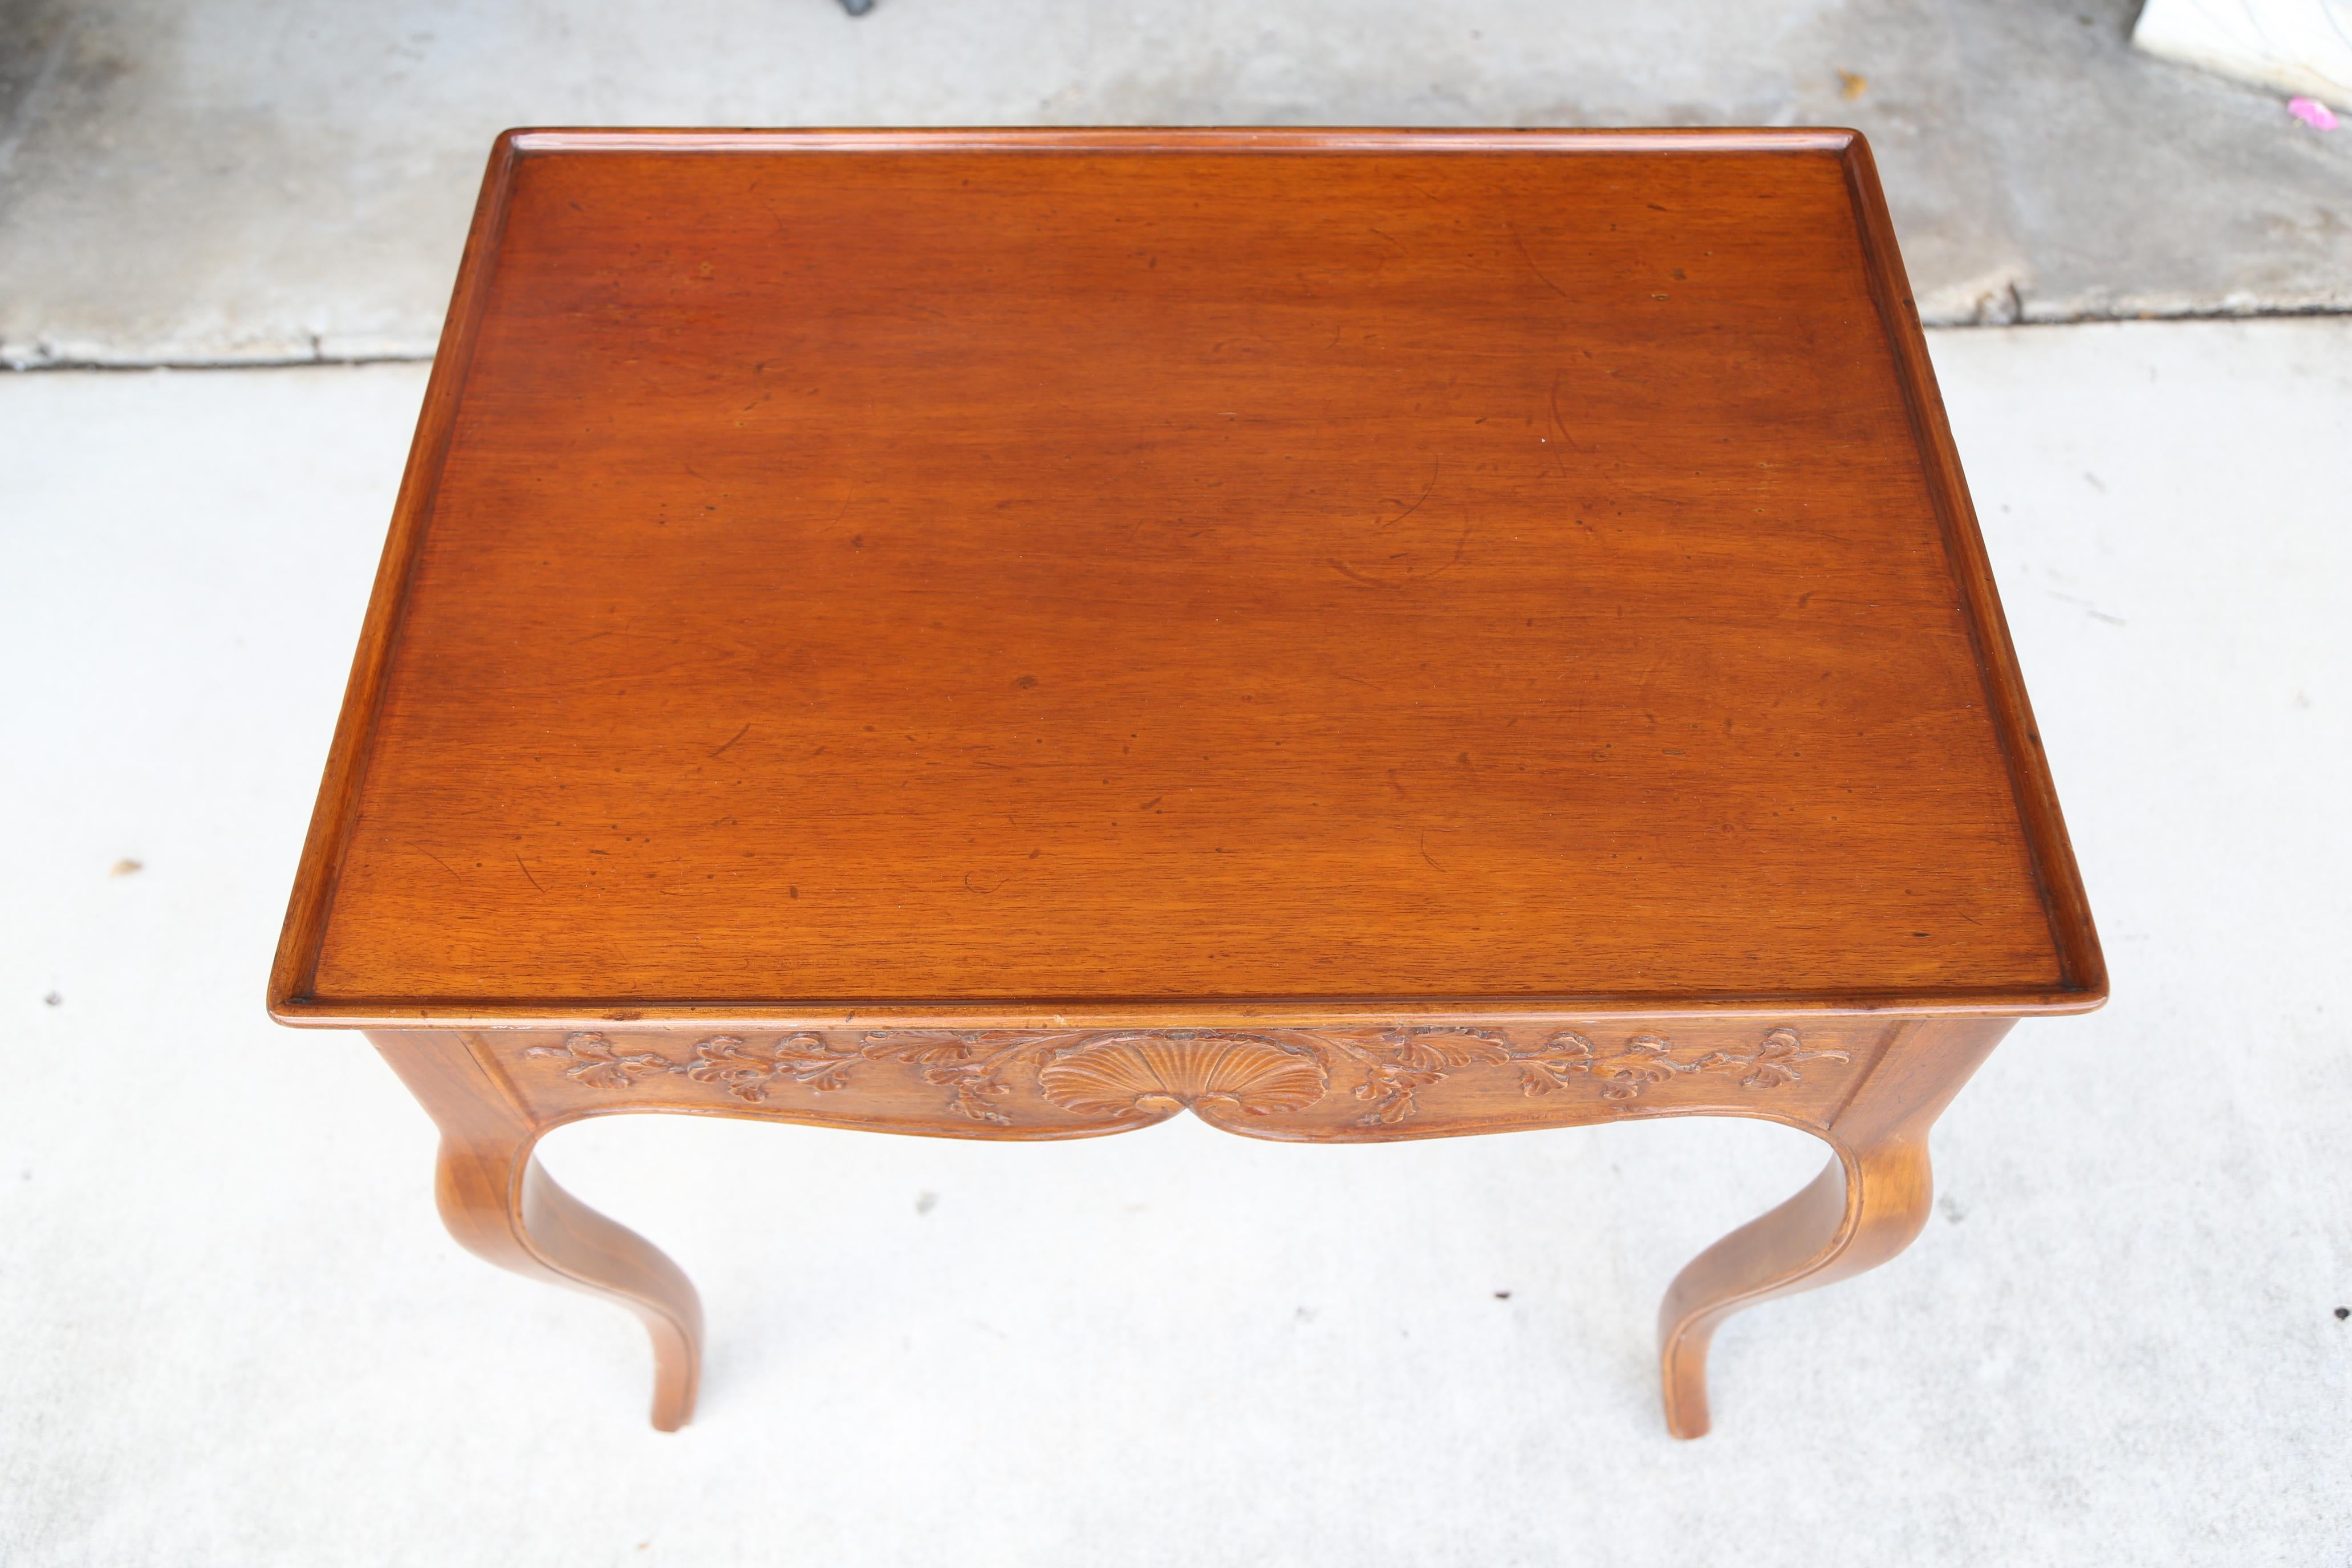 Country French tea table with carved shell motif on apron. Single drawer on one side.